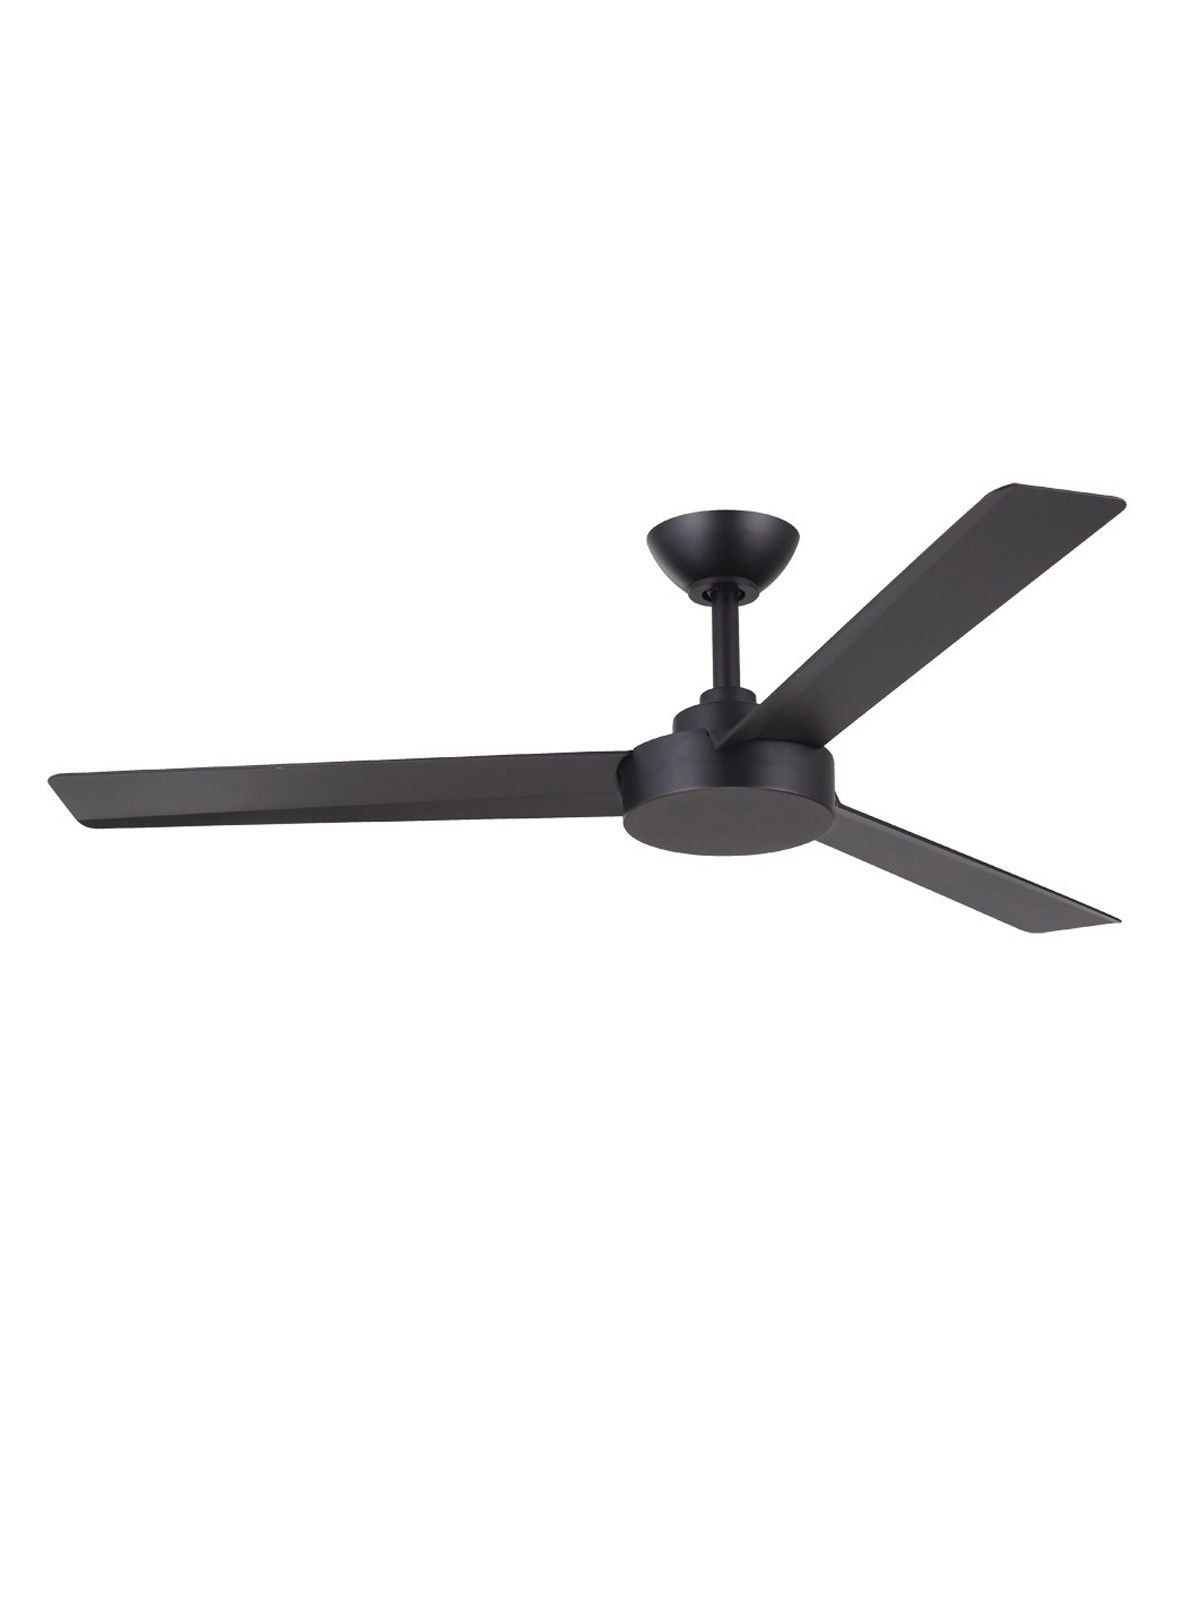 2019 Roto 3 Blade Ceiling Fans Intended For Roto 3 Blade Fan Only In Matt Black (View 5 of 20)